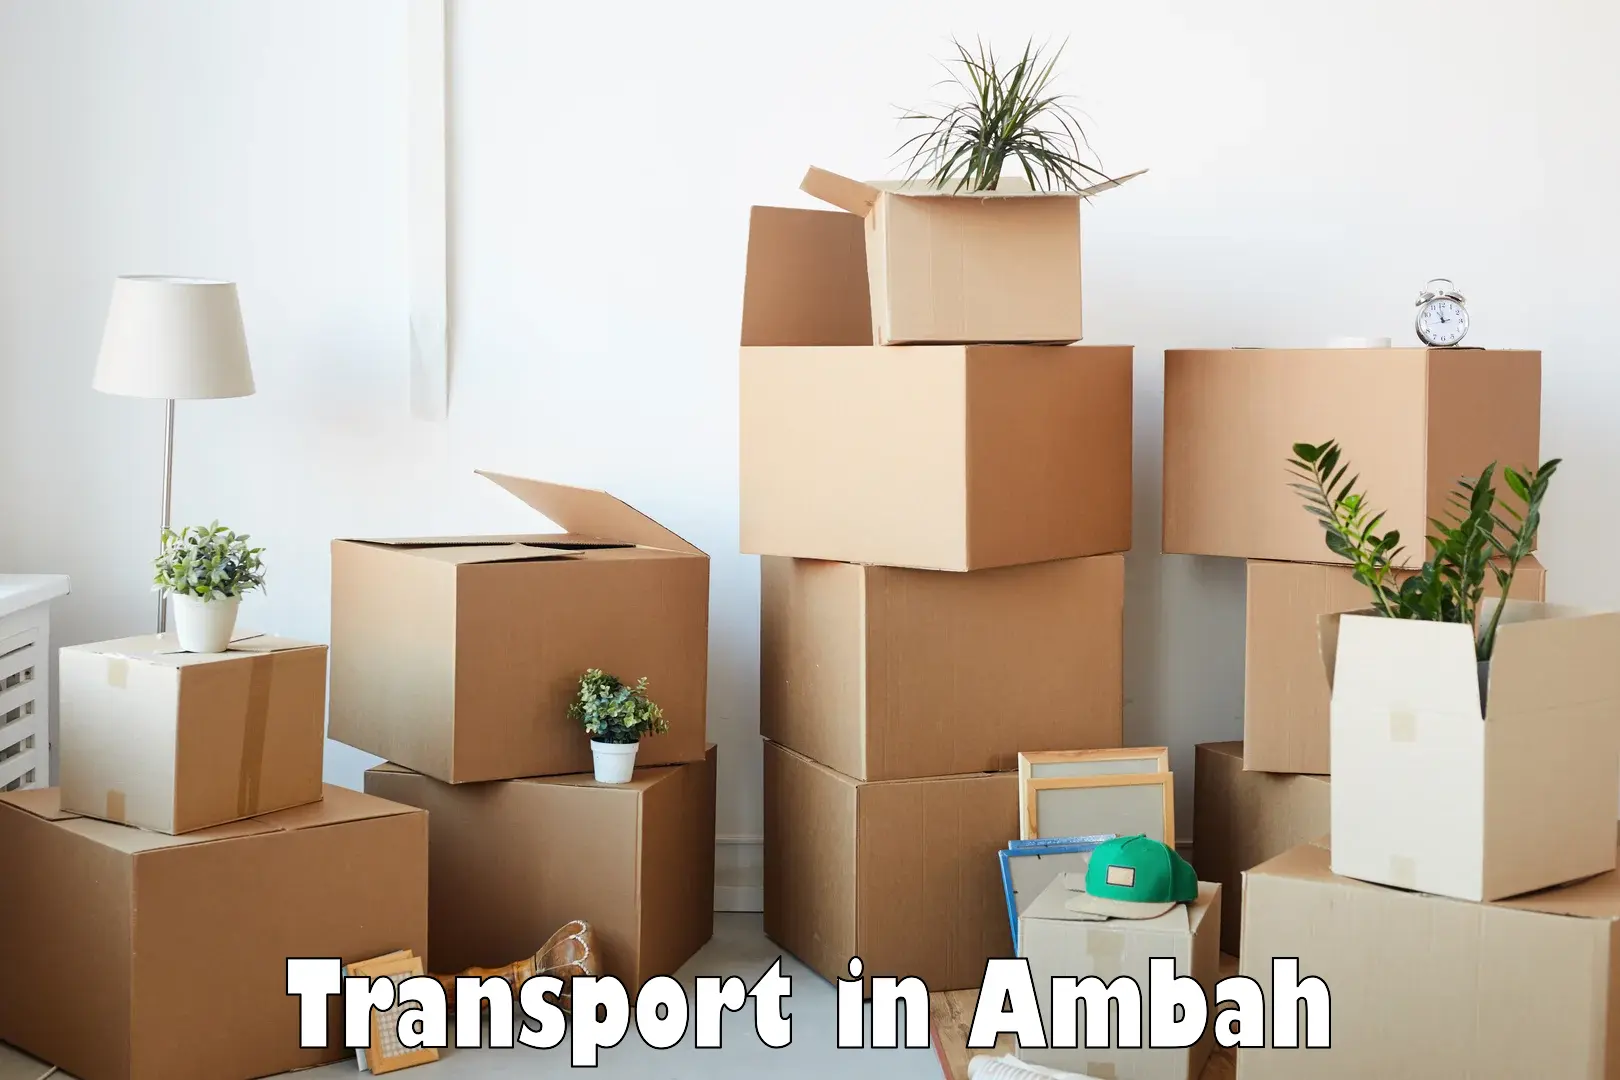 Vehicle transport services in Ambah